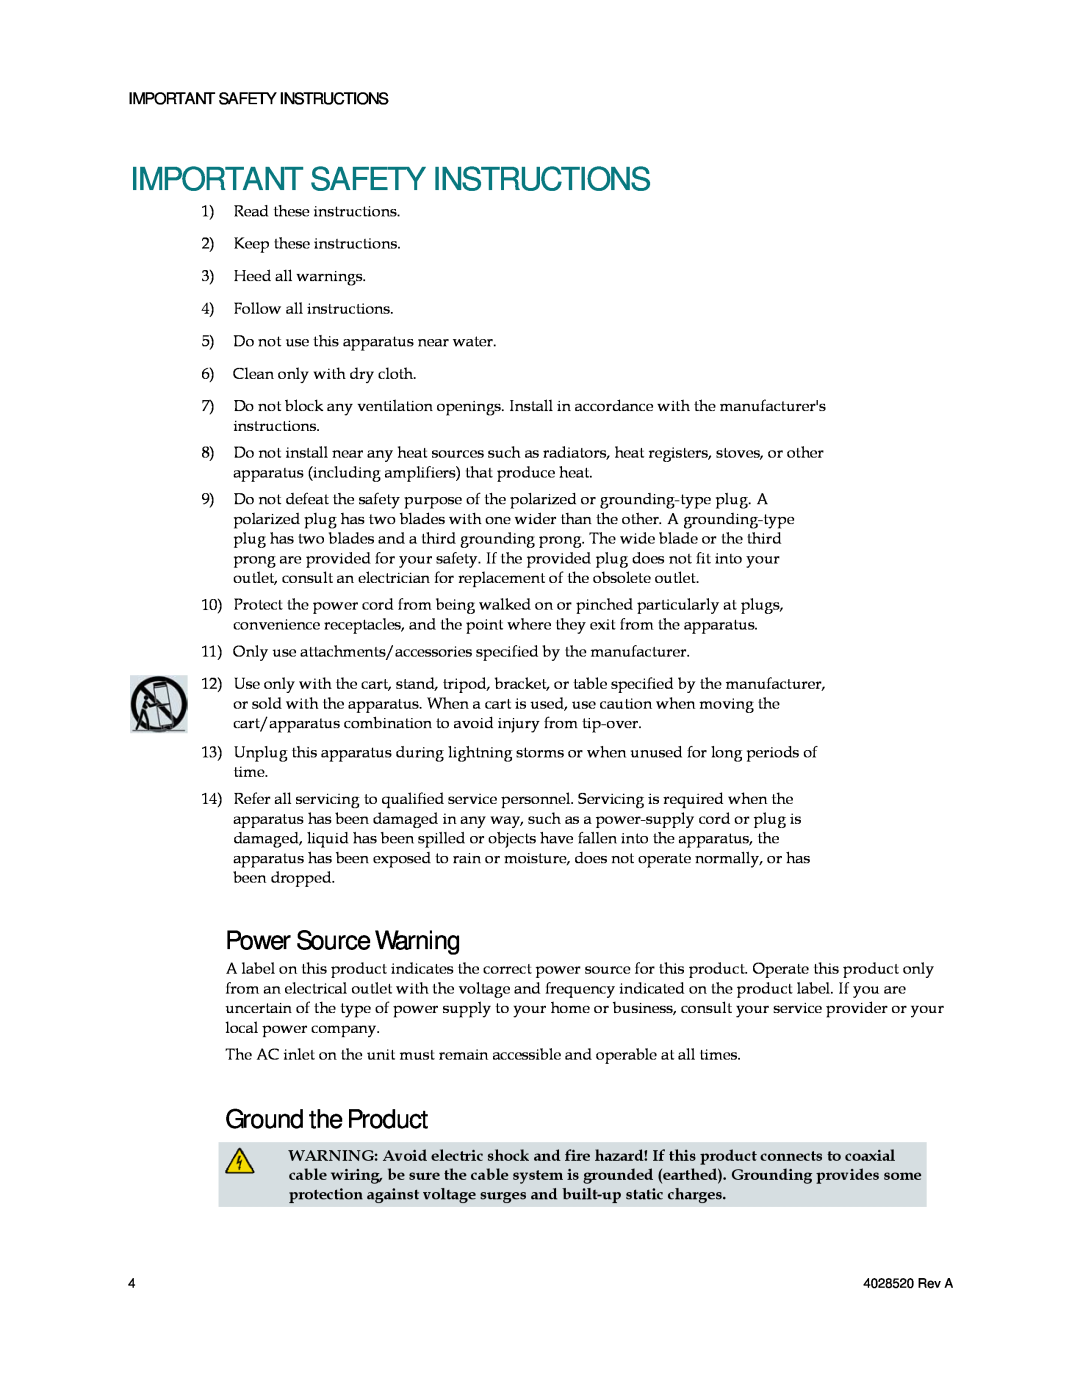 Cisco Systems DPQ2202 important safety instructions Power Source Warning, Ground the Product, Important Safety Instructions 